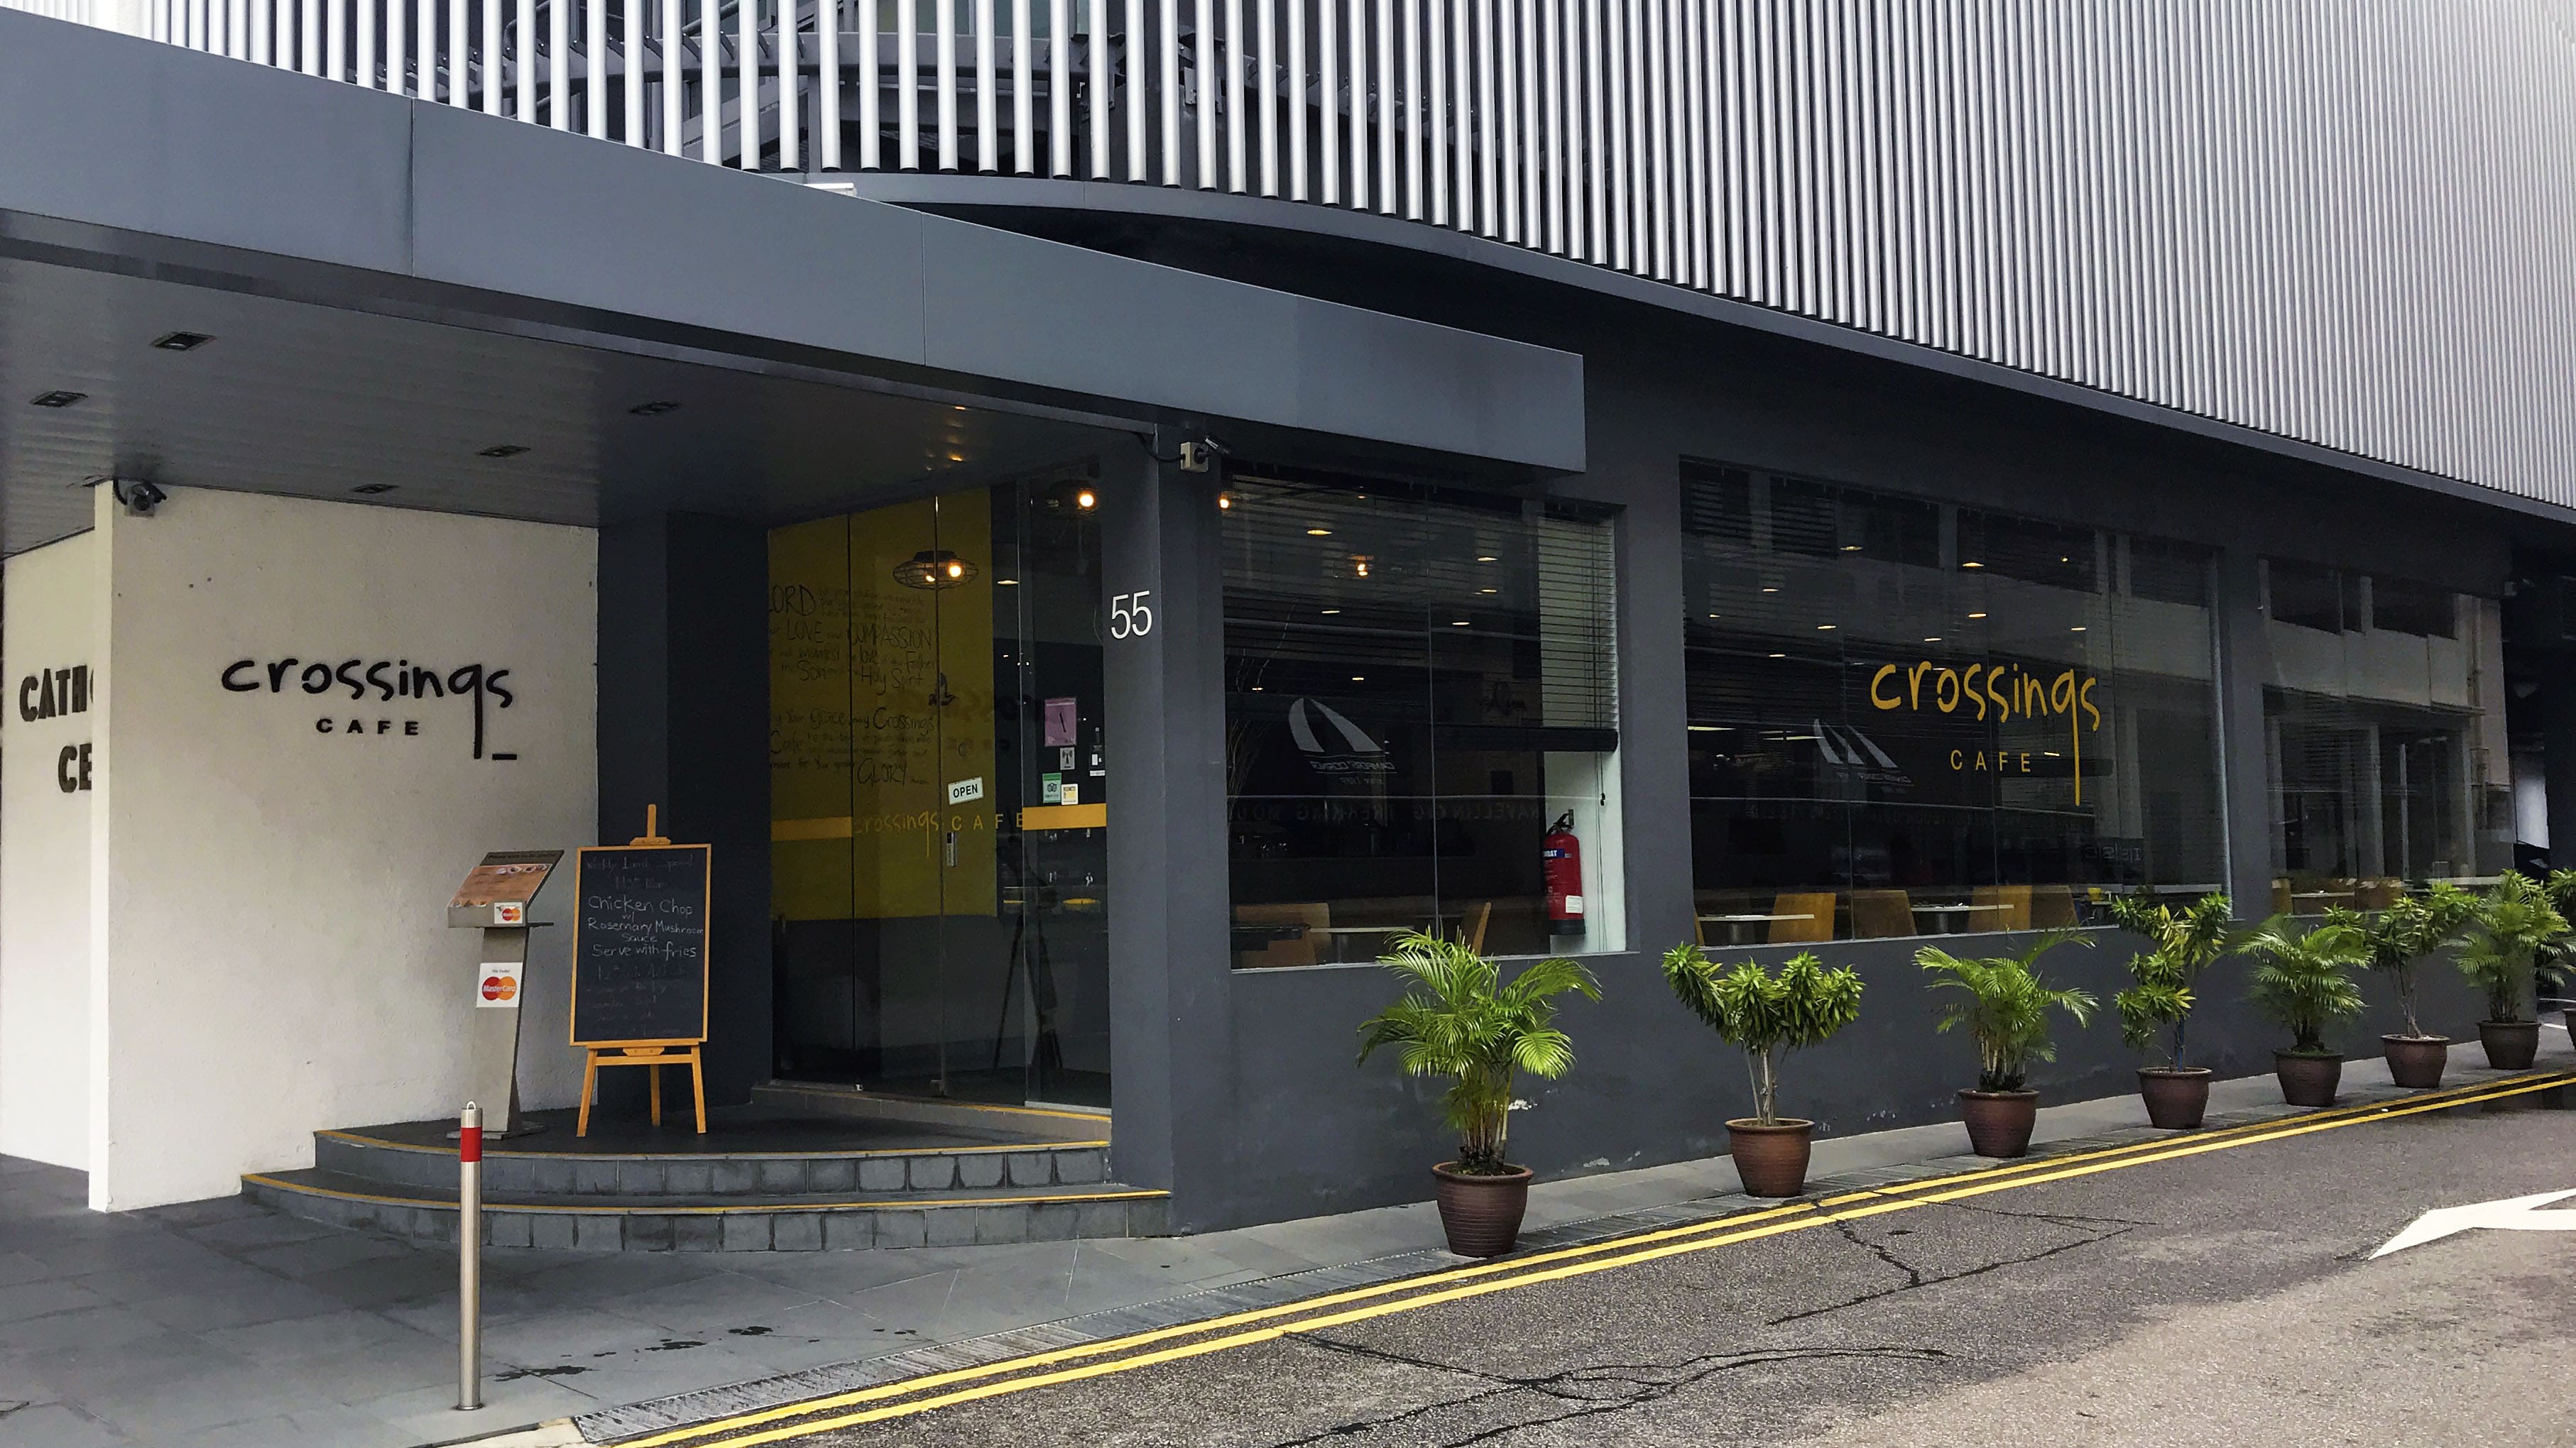 Tucked away in the Catholic Centre on Waterloo Street is Crossings Cafe, which serves affordable fusion cuisine. The social enterprise eatery employs people from disadvantaged backgrounds and donates its proceeds to charity. Photo by Joanne Yip